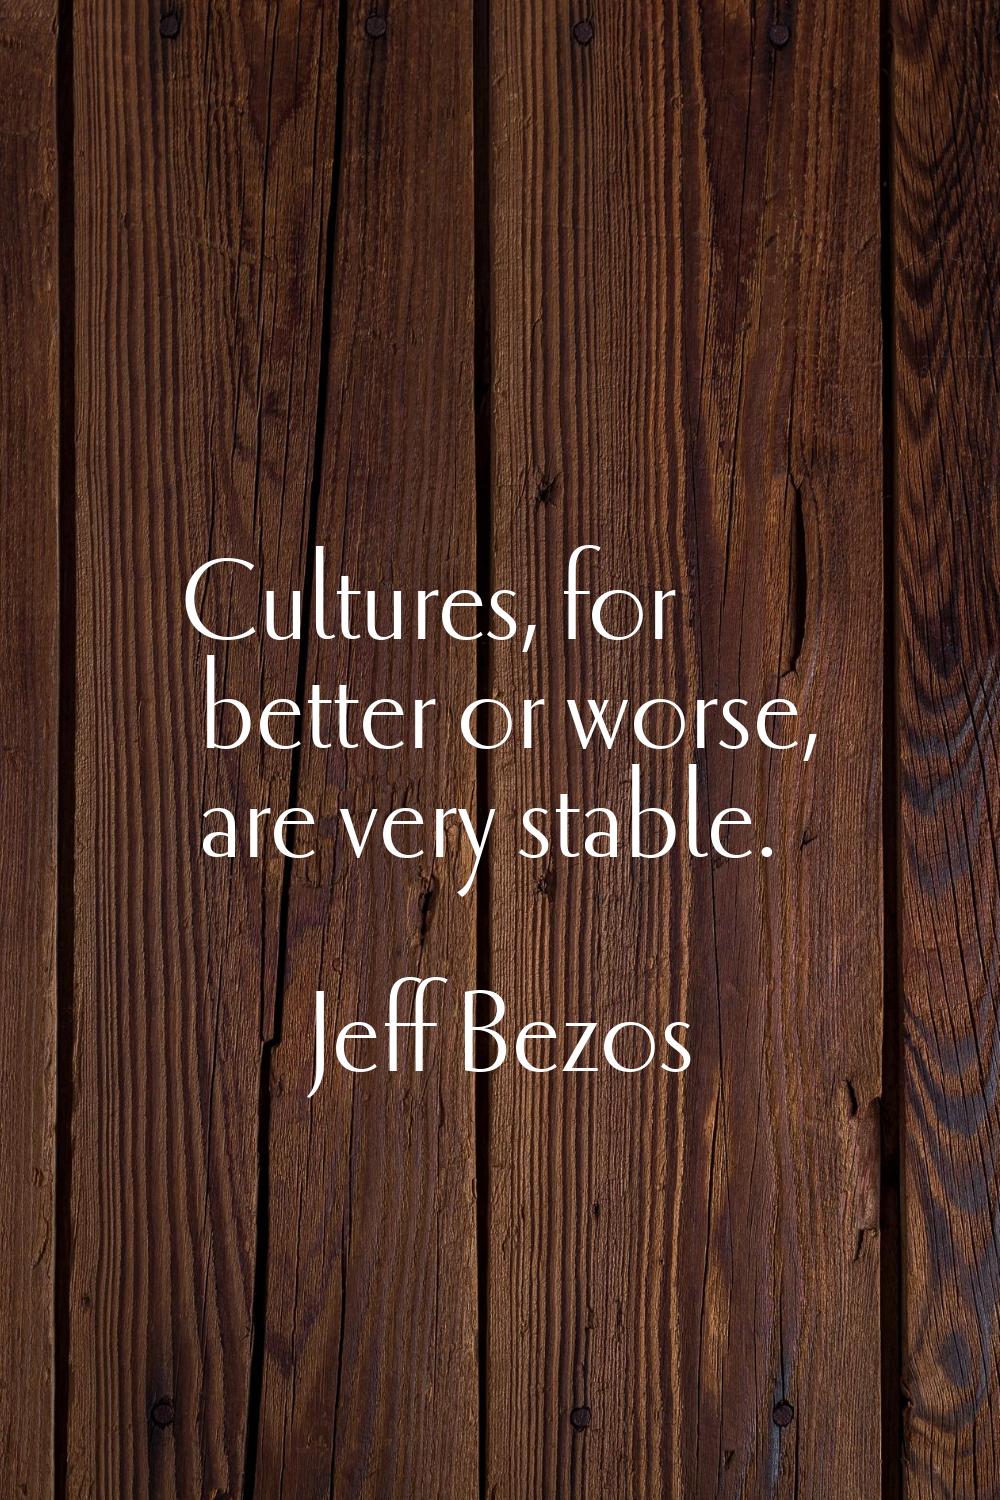 Cultures, for better or worse, are very stable.